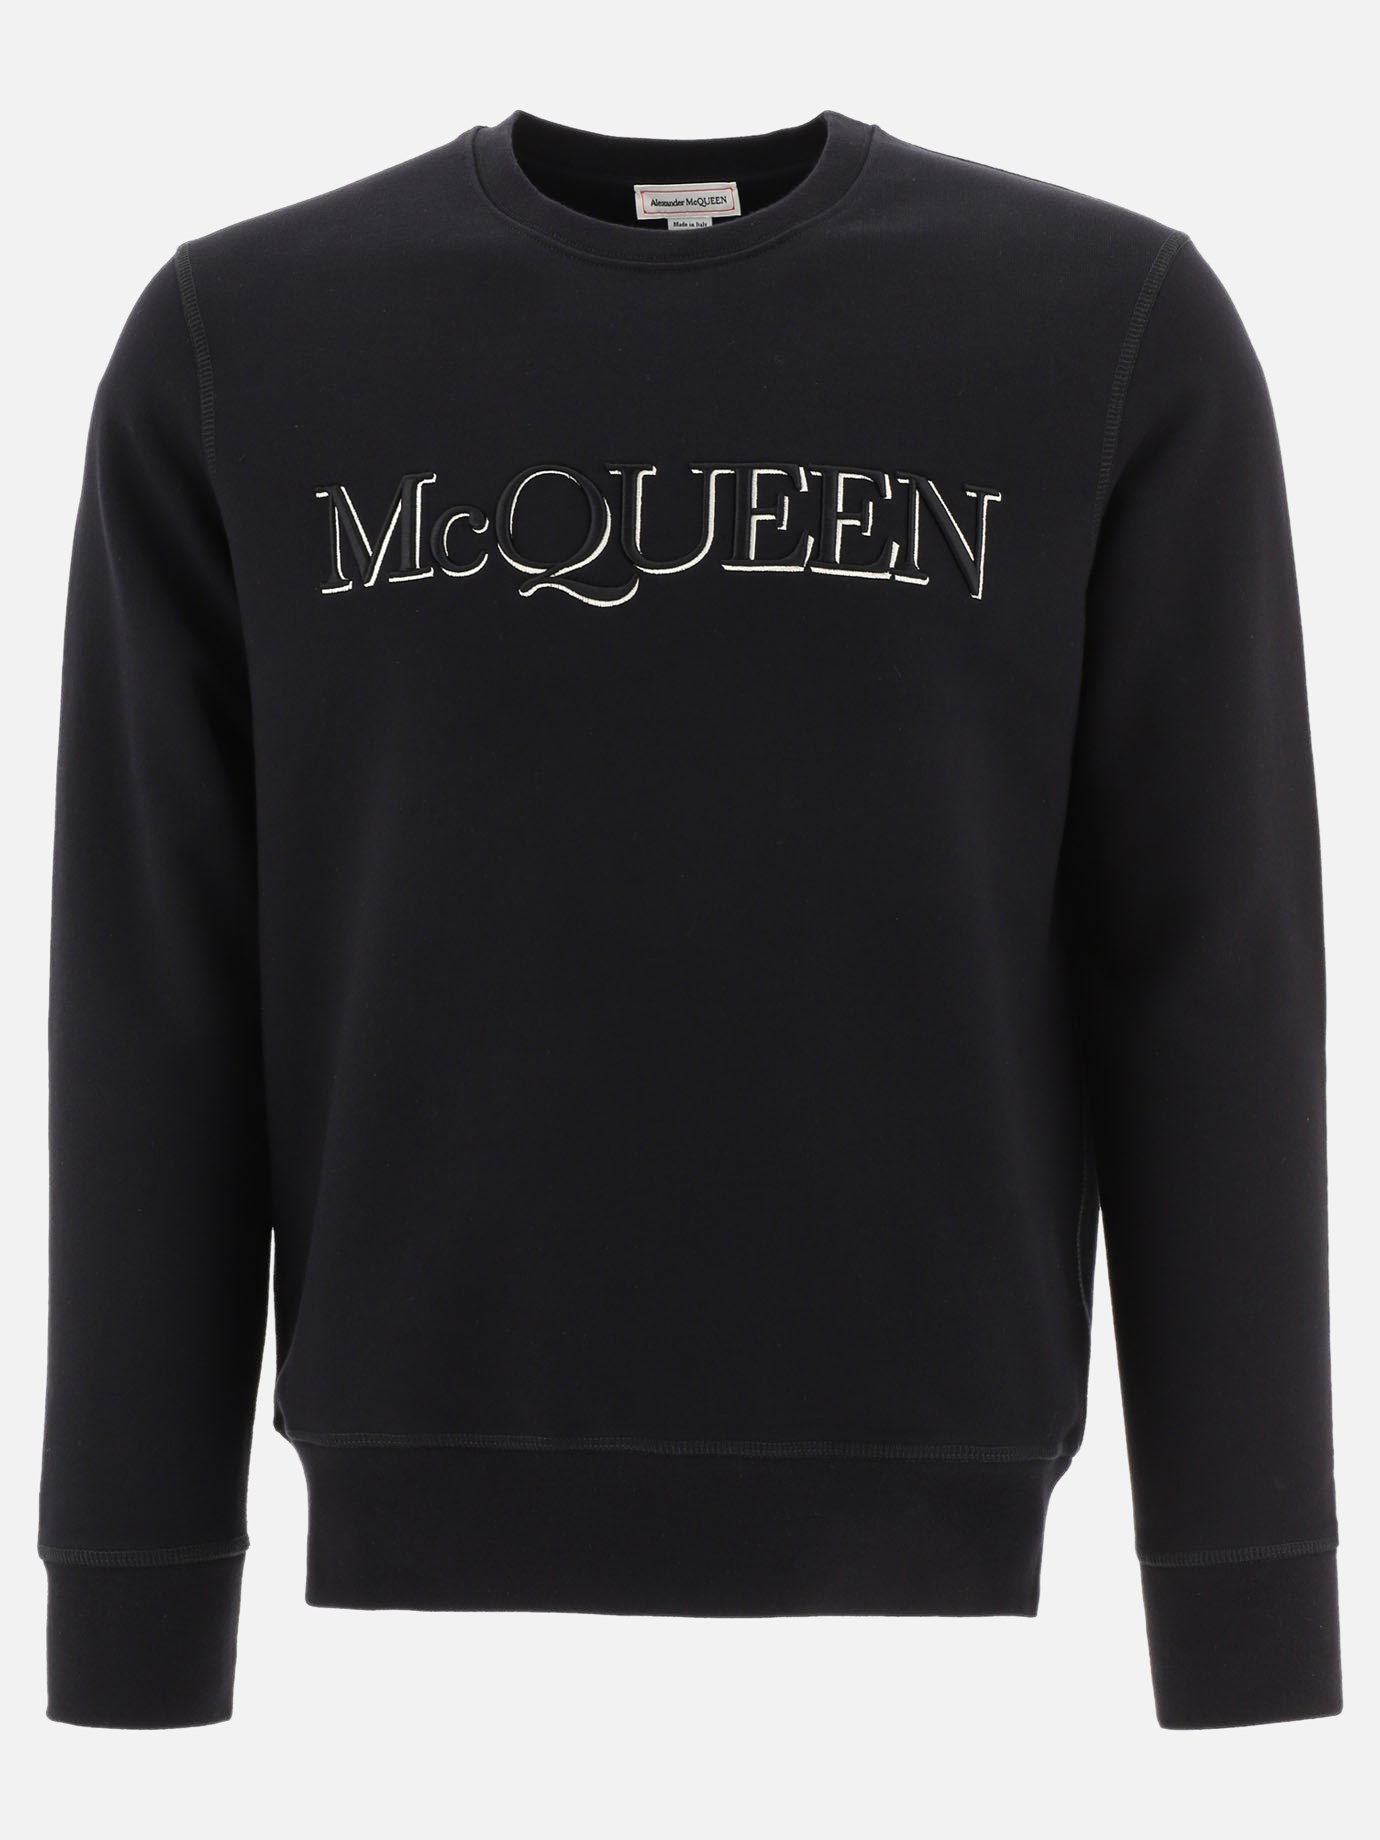 Sweatshirt with embroidery by Alexander McQueen